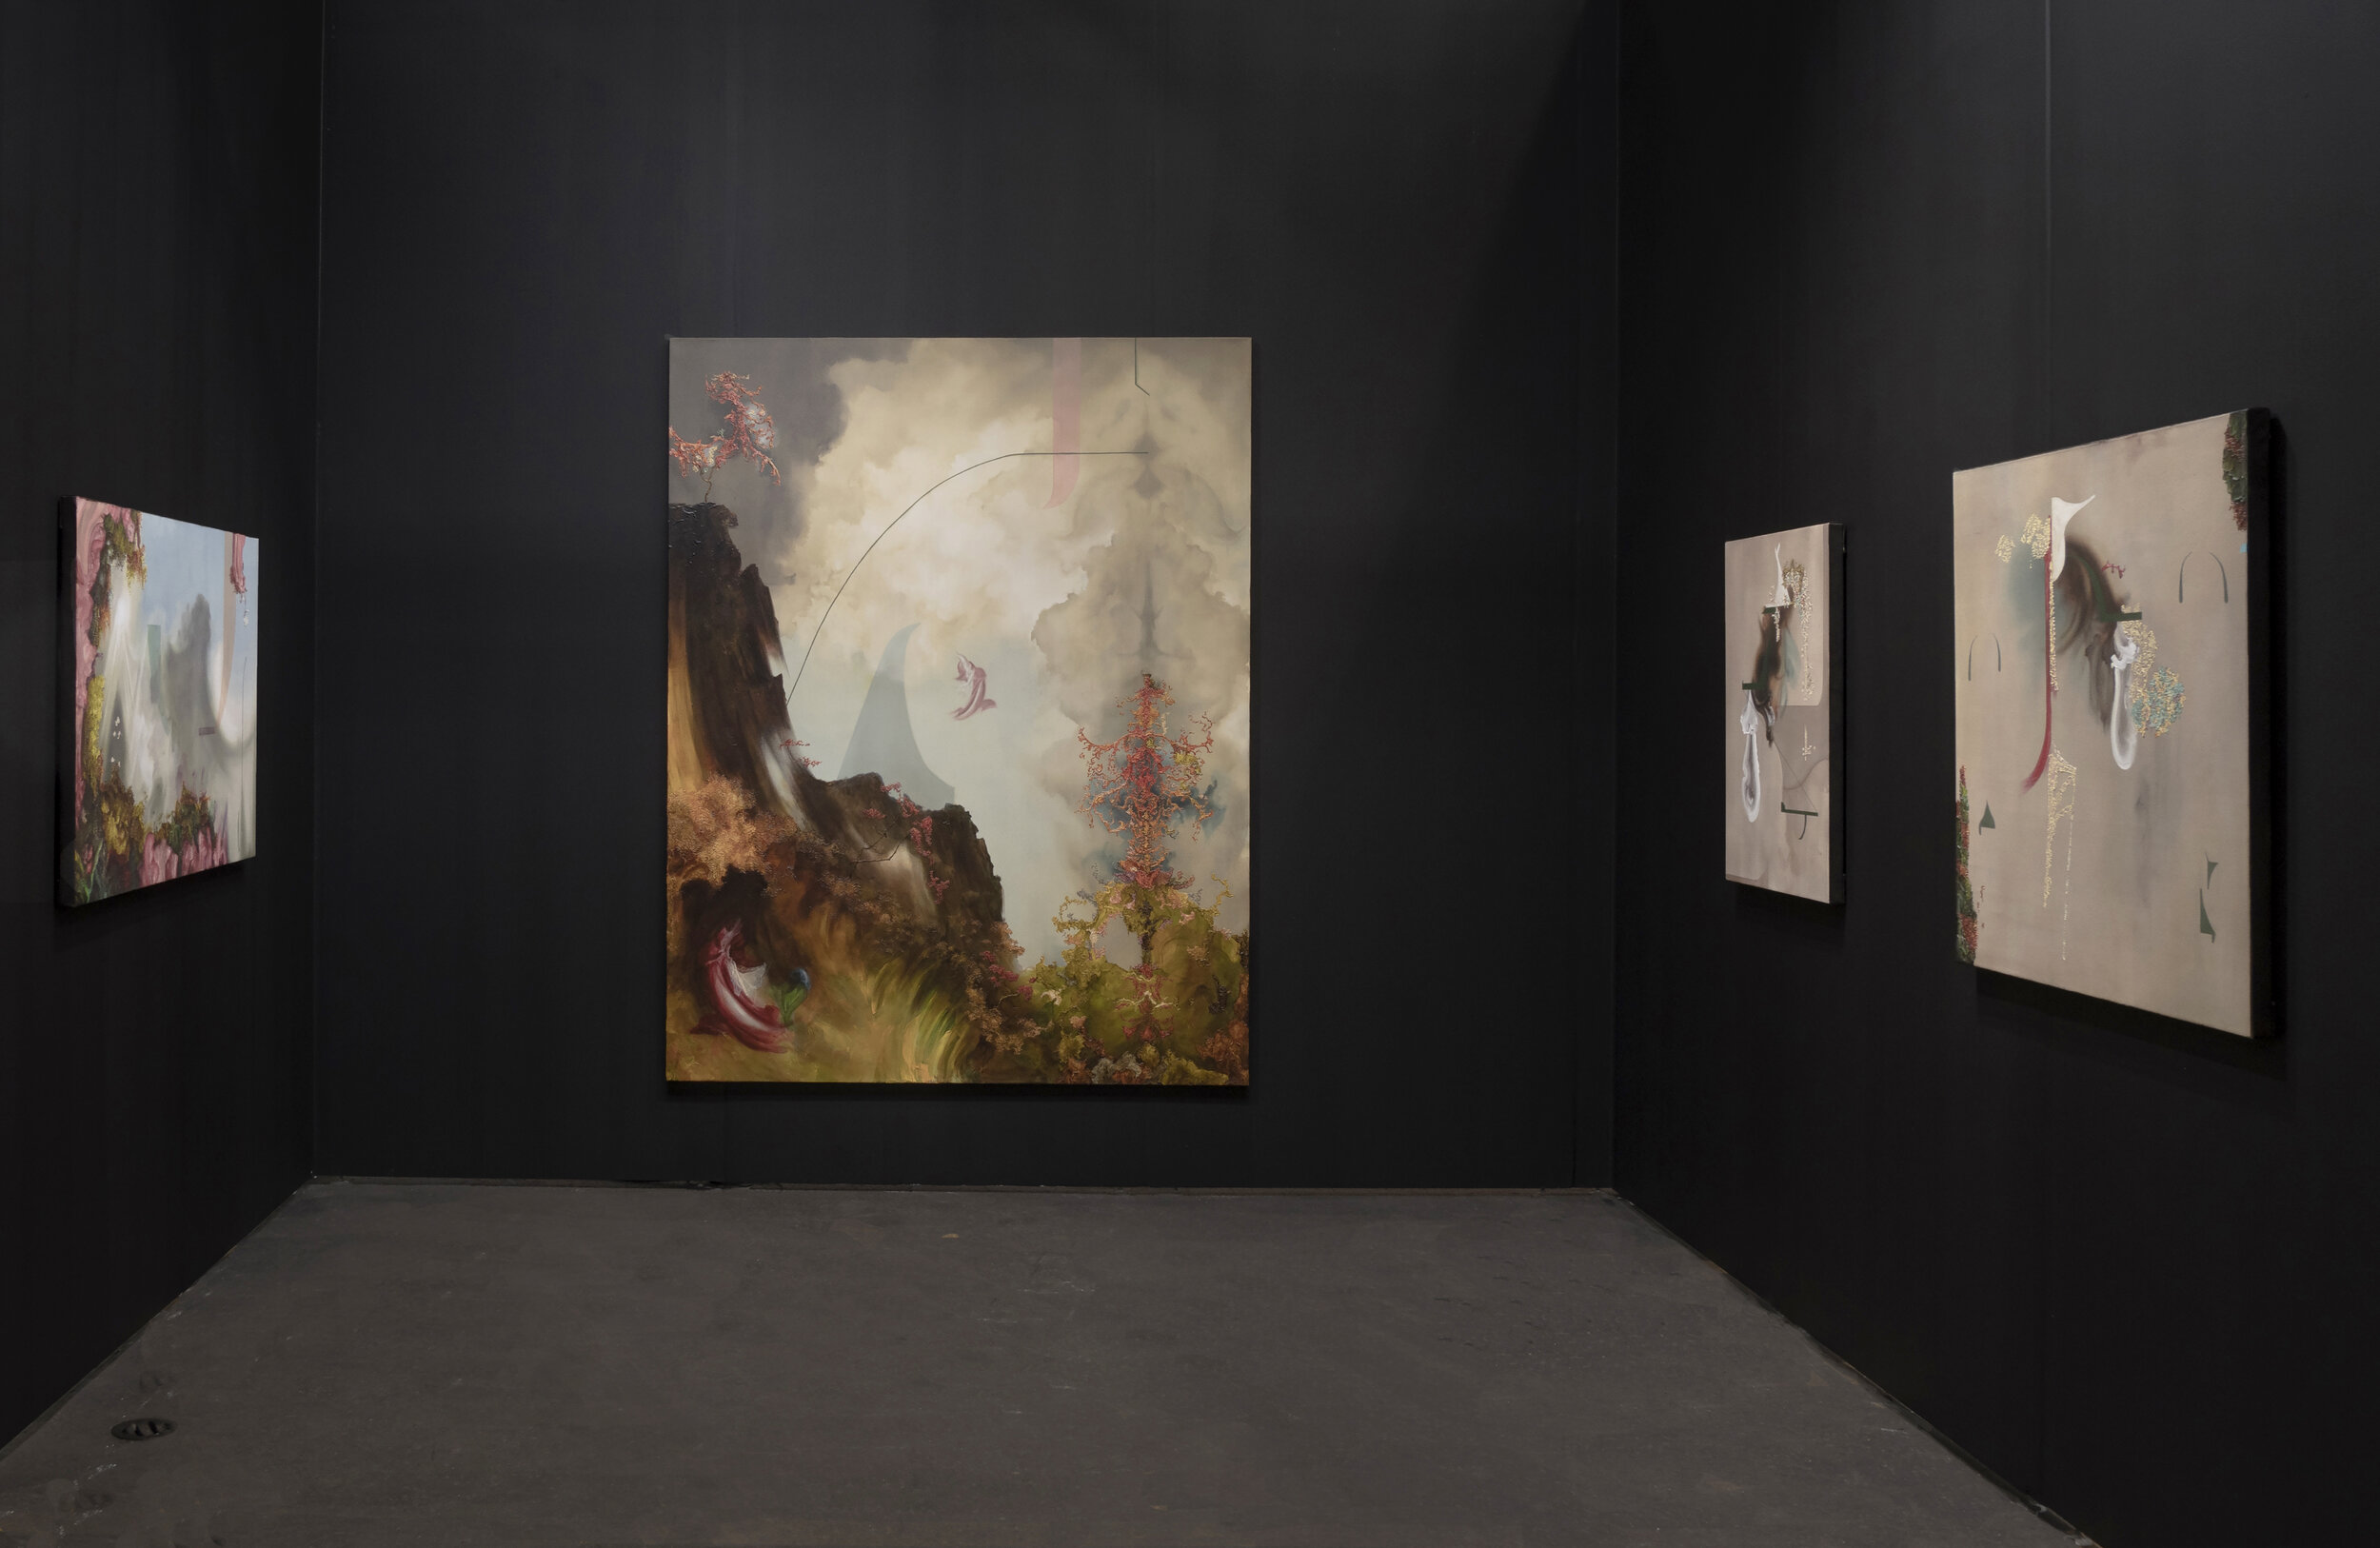  Image: UNTITLED Art, San Francisco 2020, installation view, Gallery Wendi Norris, Booth A1, Pier 35, 1454 The Embarcadero, San Francisco, CA, January 16 – 19, 2020. Photo: David Stroud. 